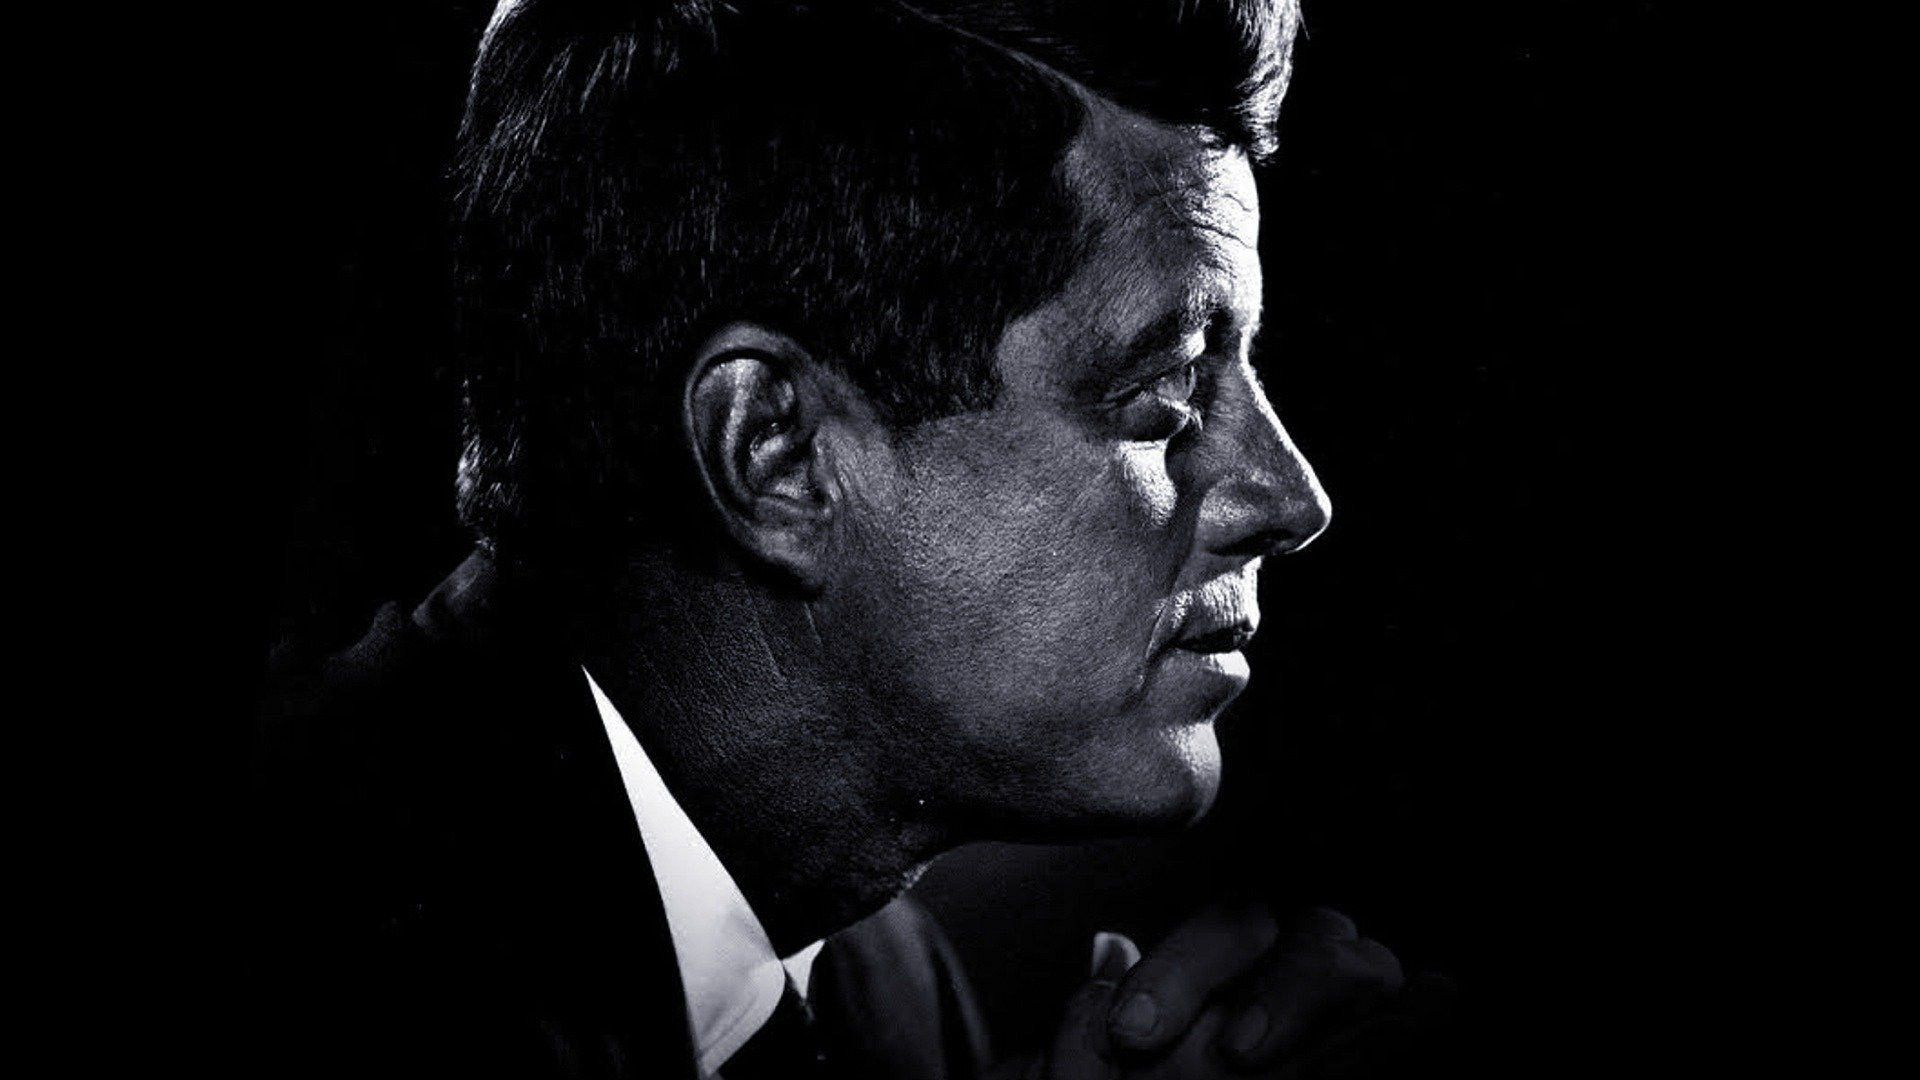 JFK Revisited - Through the Looking Glass